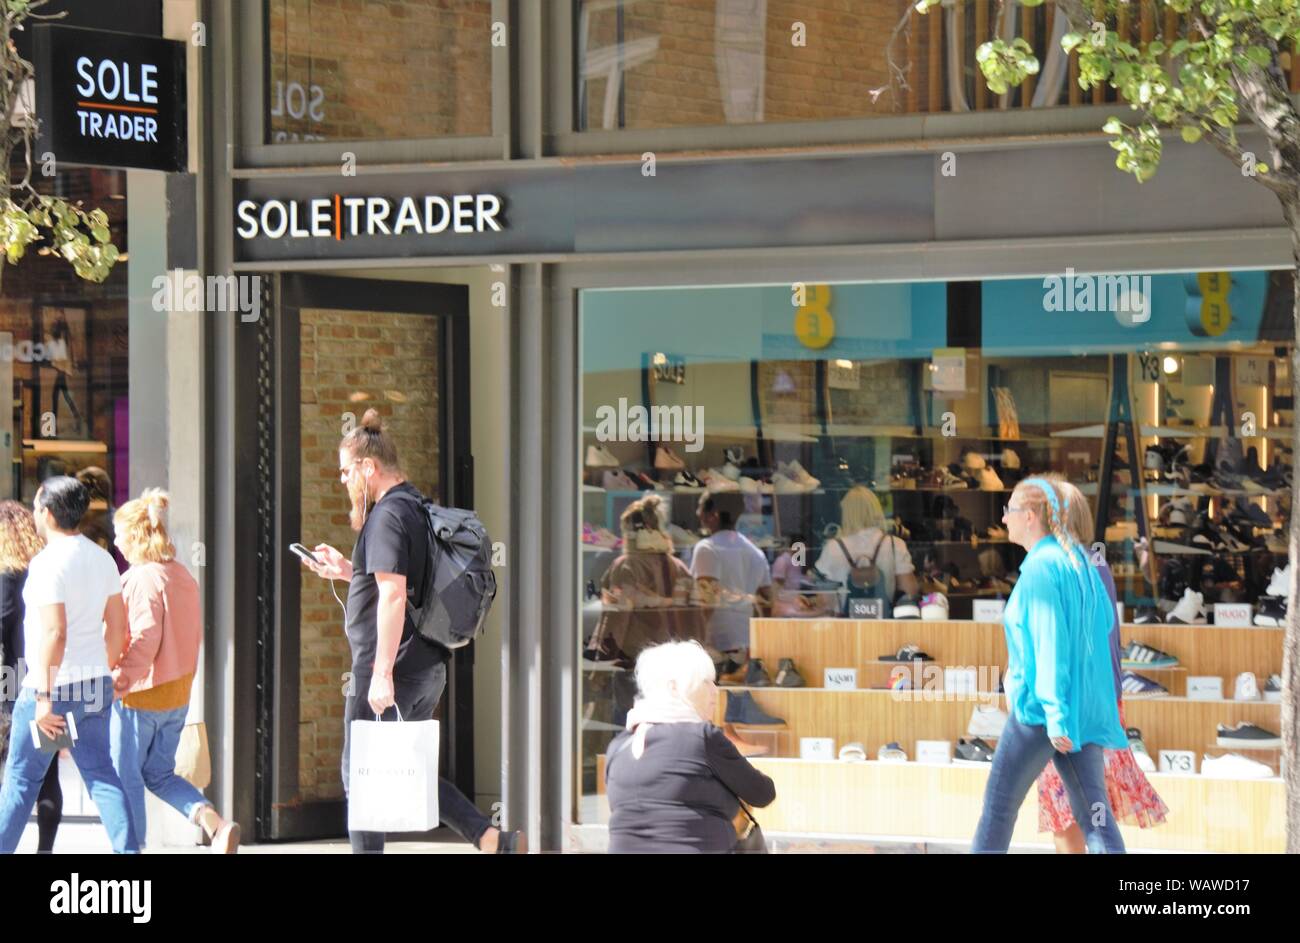 Entrance to the Sole Trader store in Oxford Street, London, UK Stock Photo